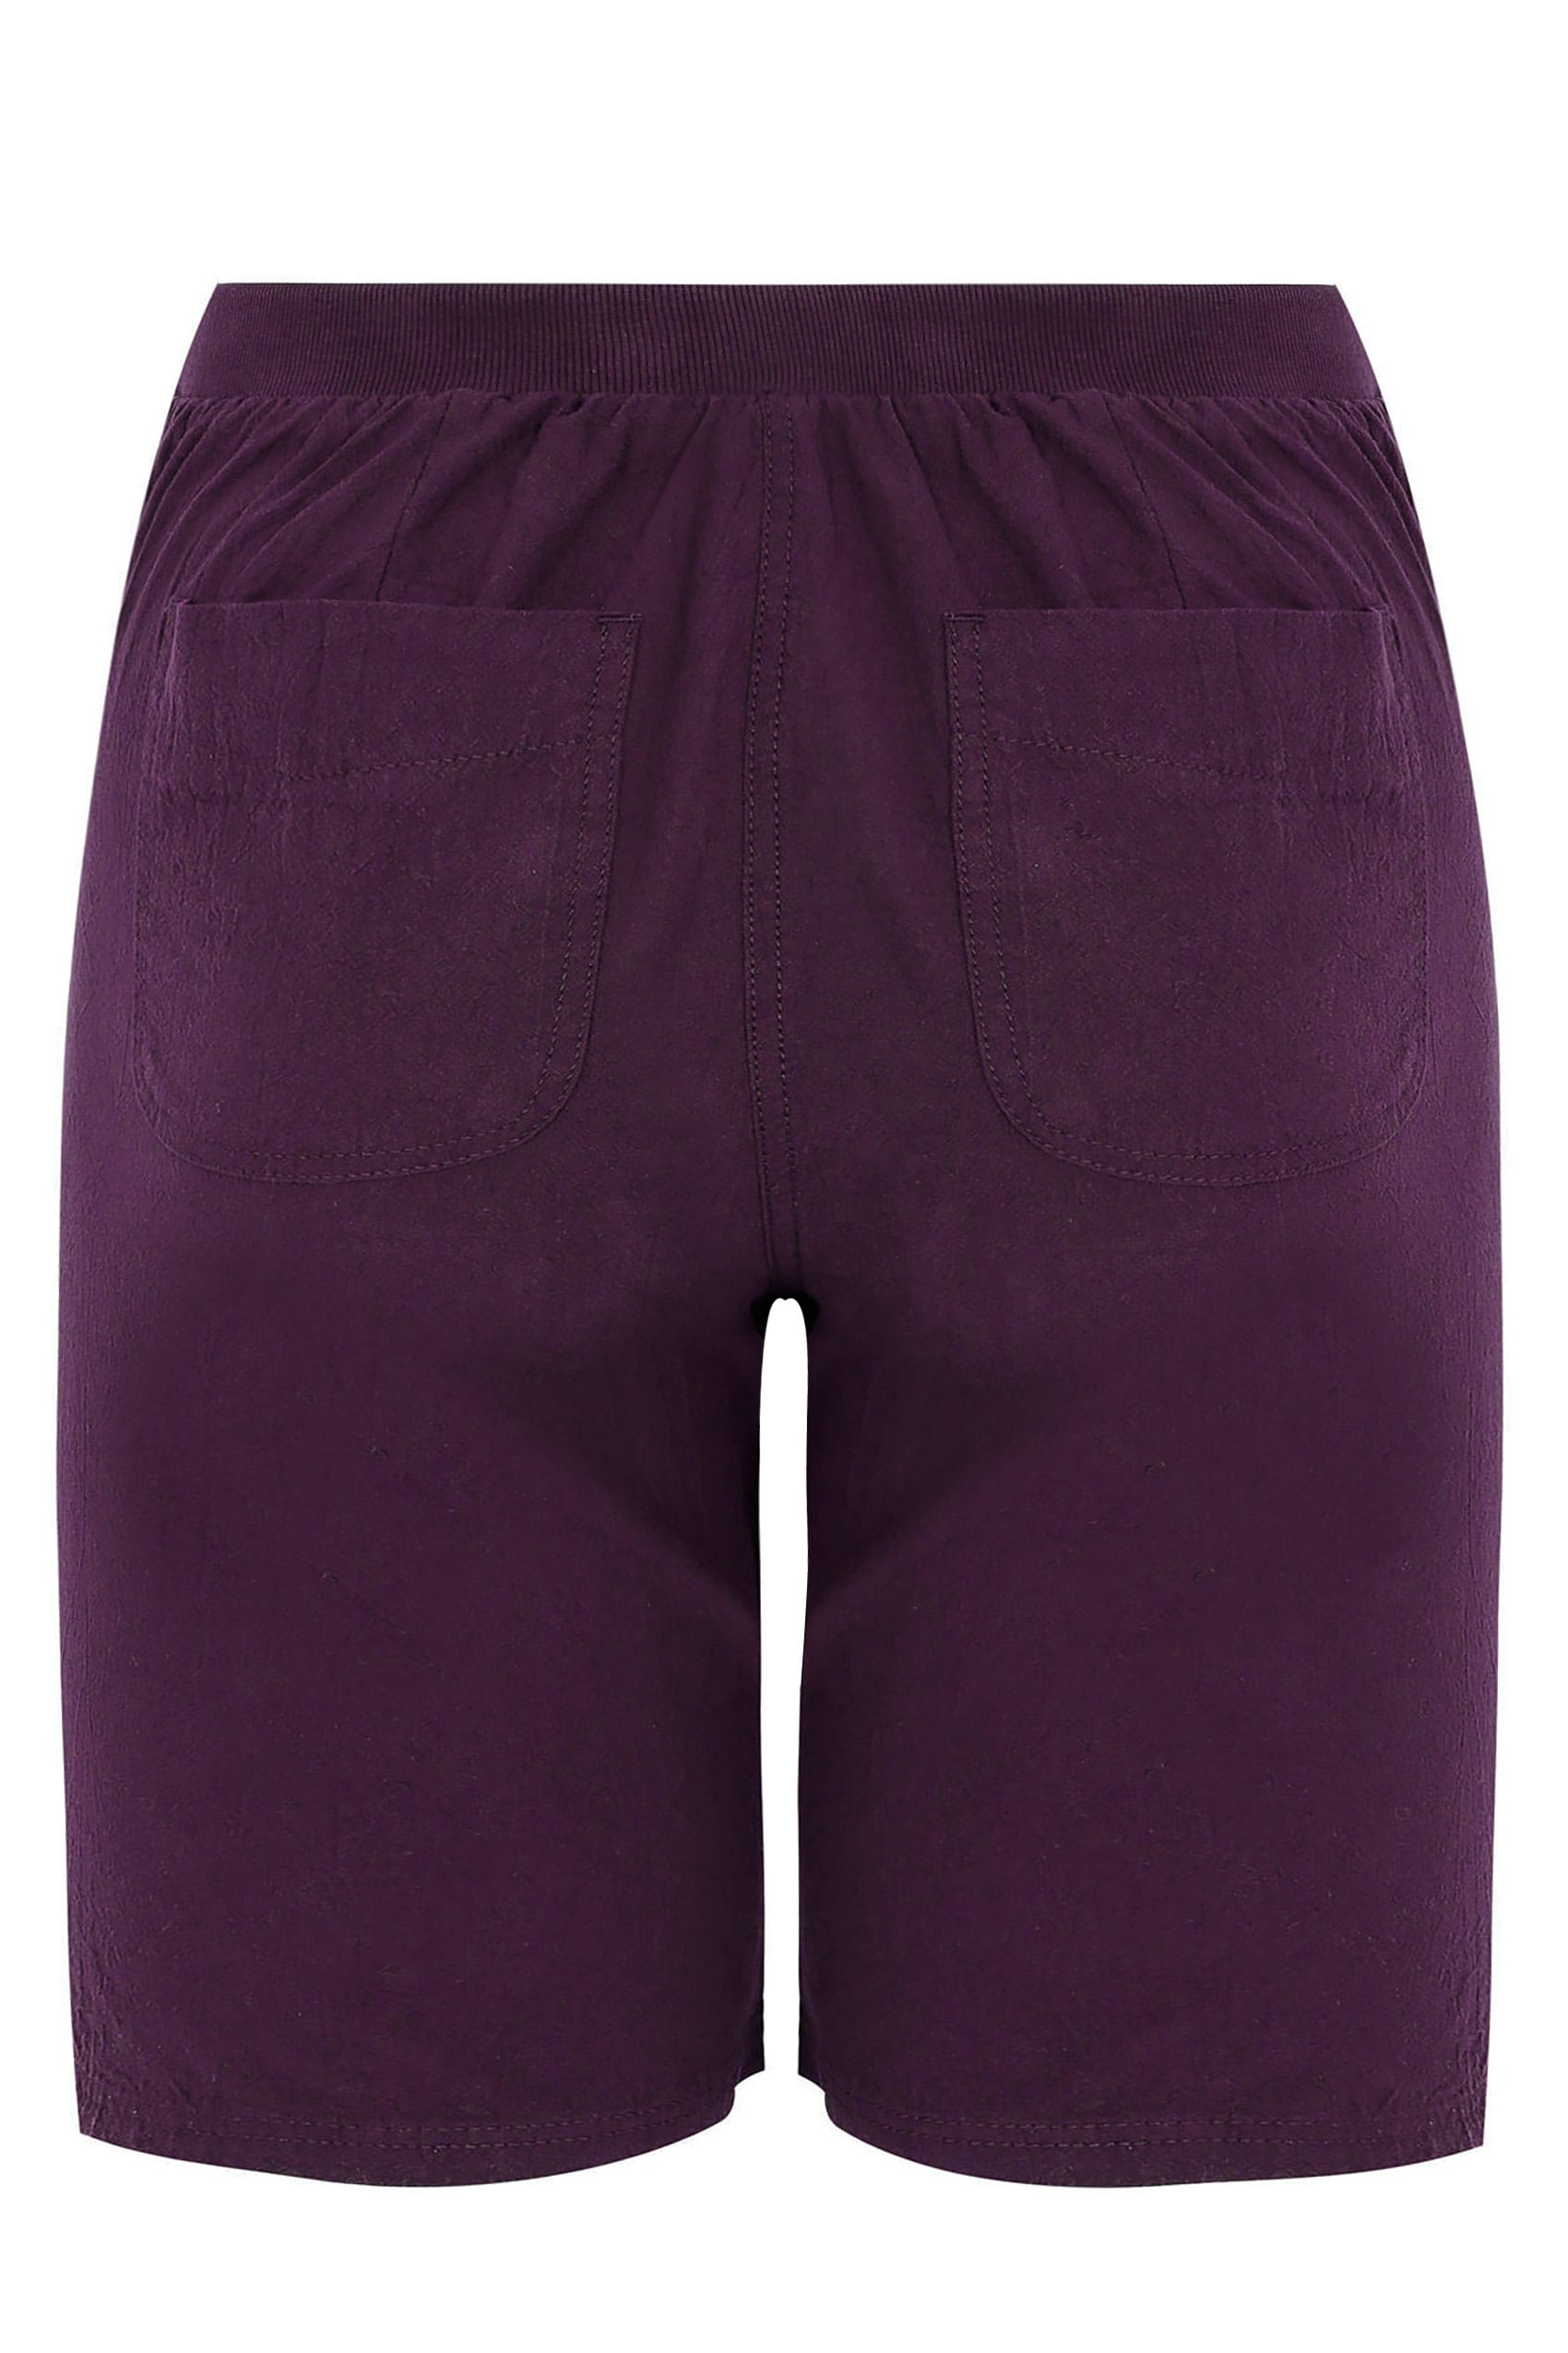 Dark Purple Cool Cotton Pull On Shorts, plus size 16 to 36